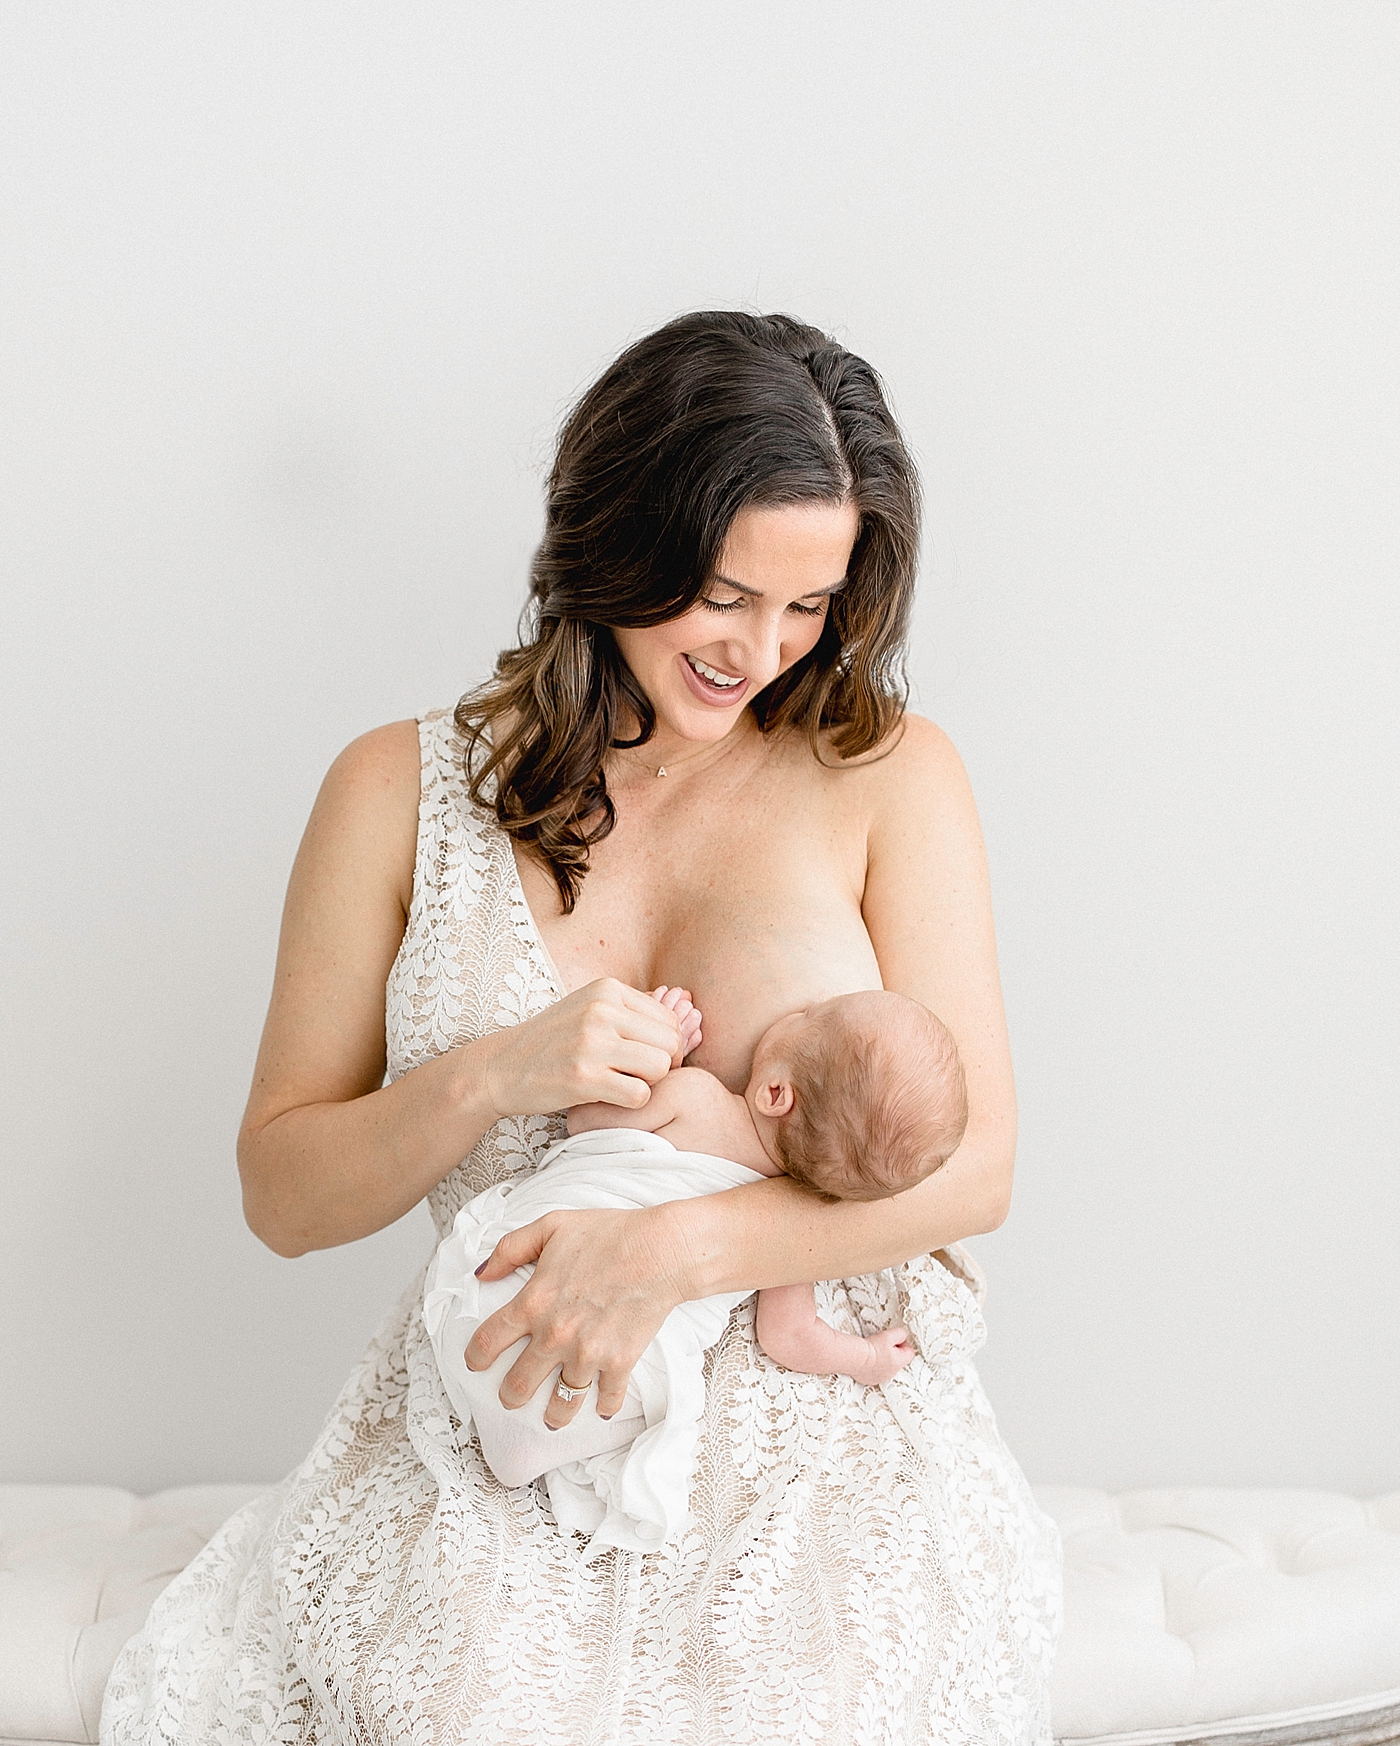 Mom holding her baby and breastfeeding during newborn session. Photo by Brittany Elise Photography.